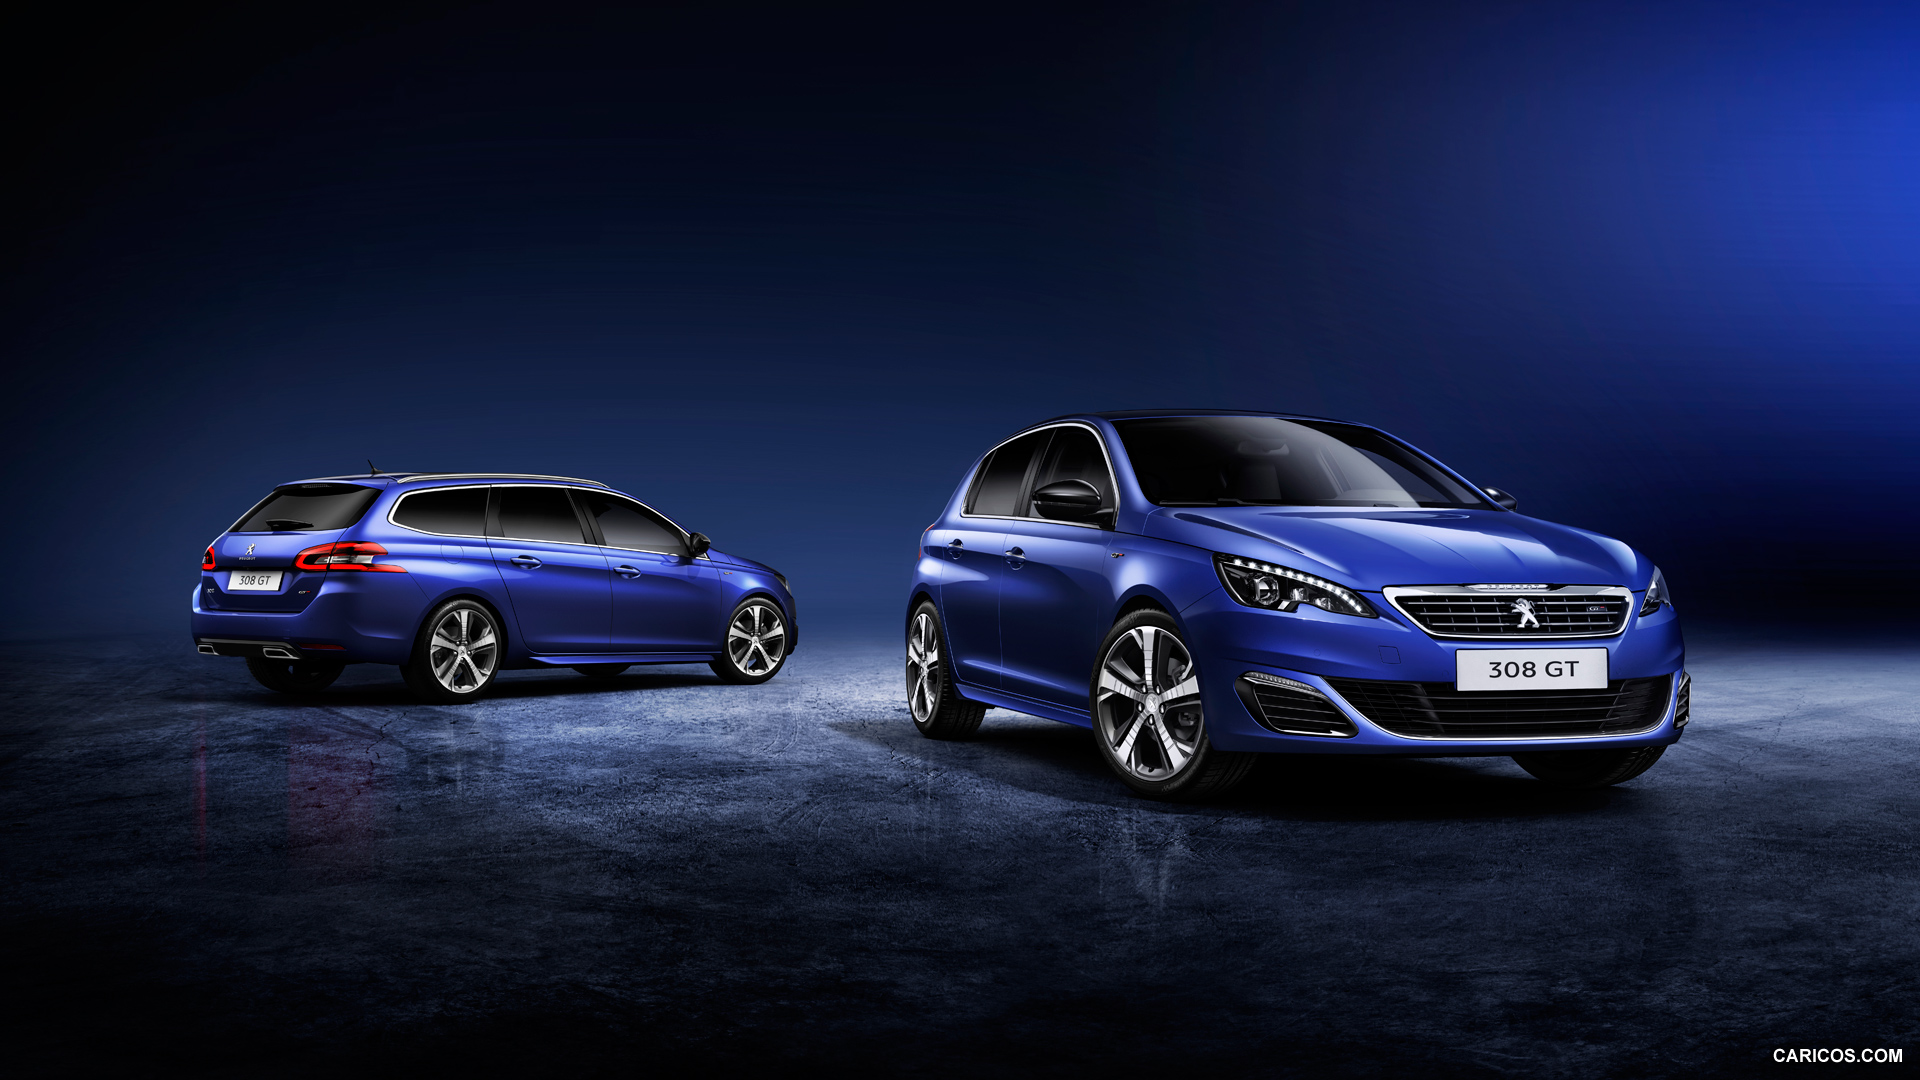 Peugeot Gt And Sw Front HD Wallpaper